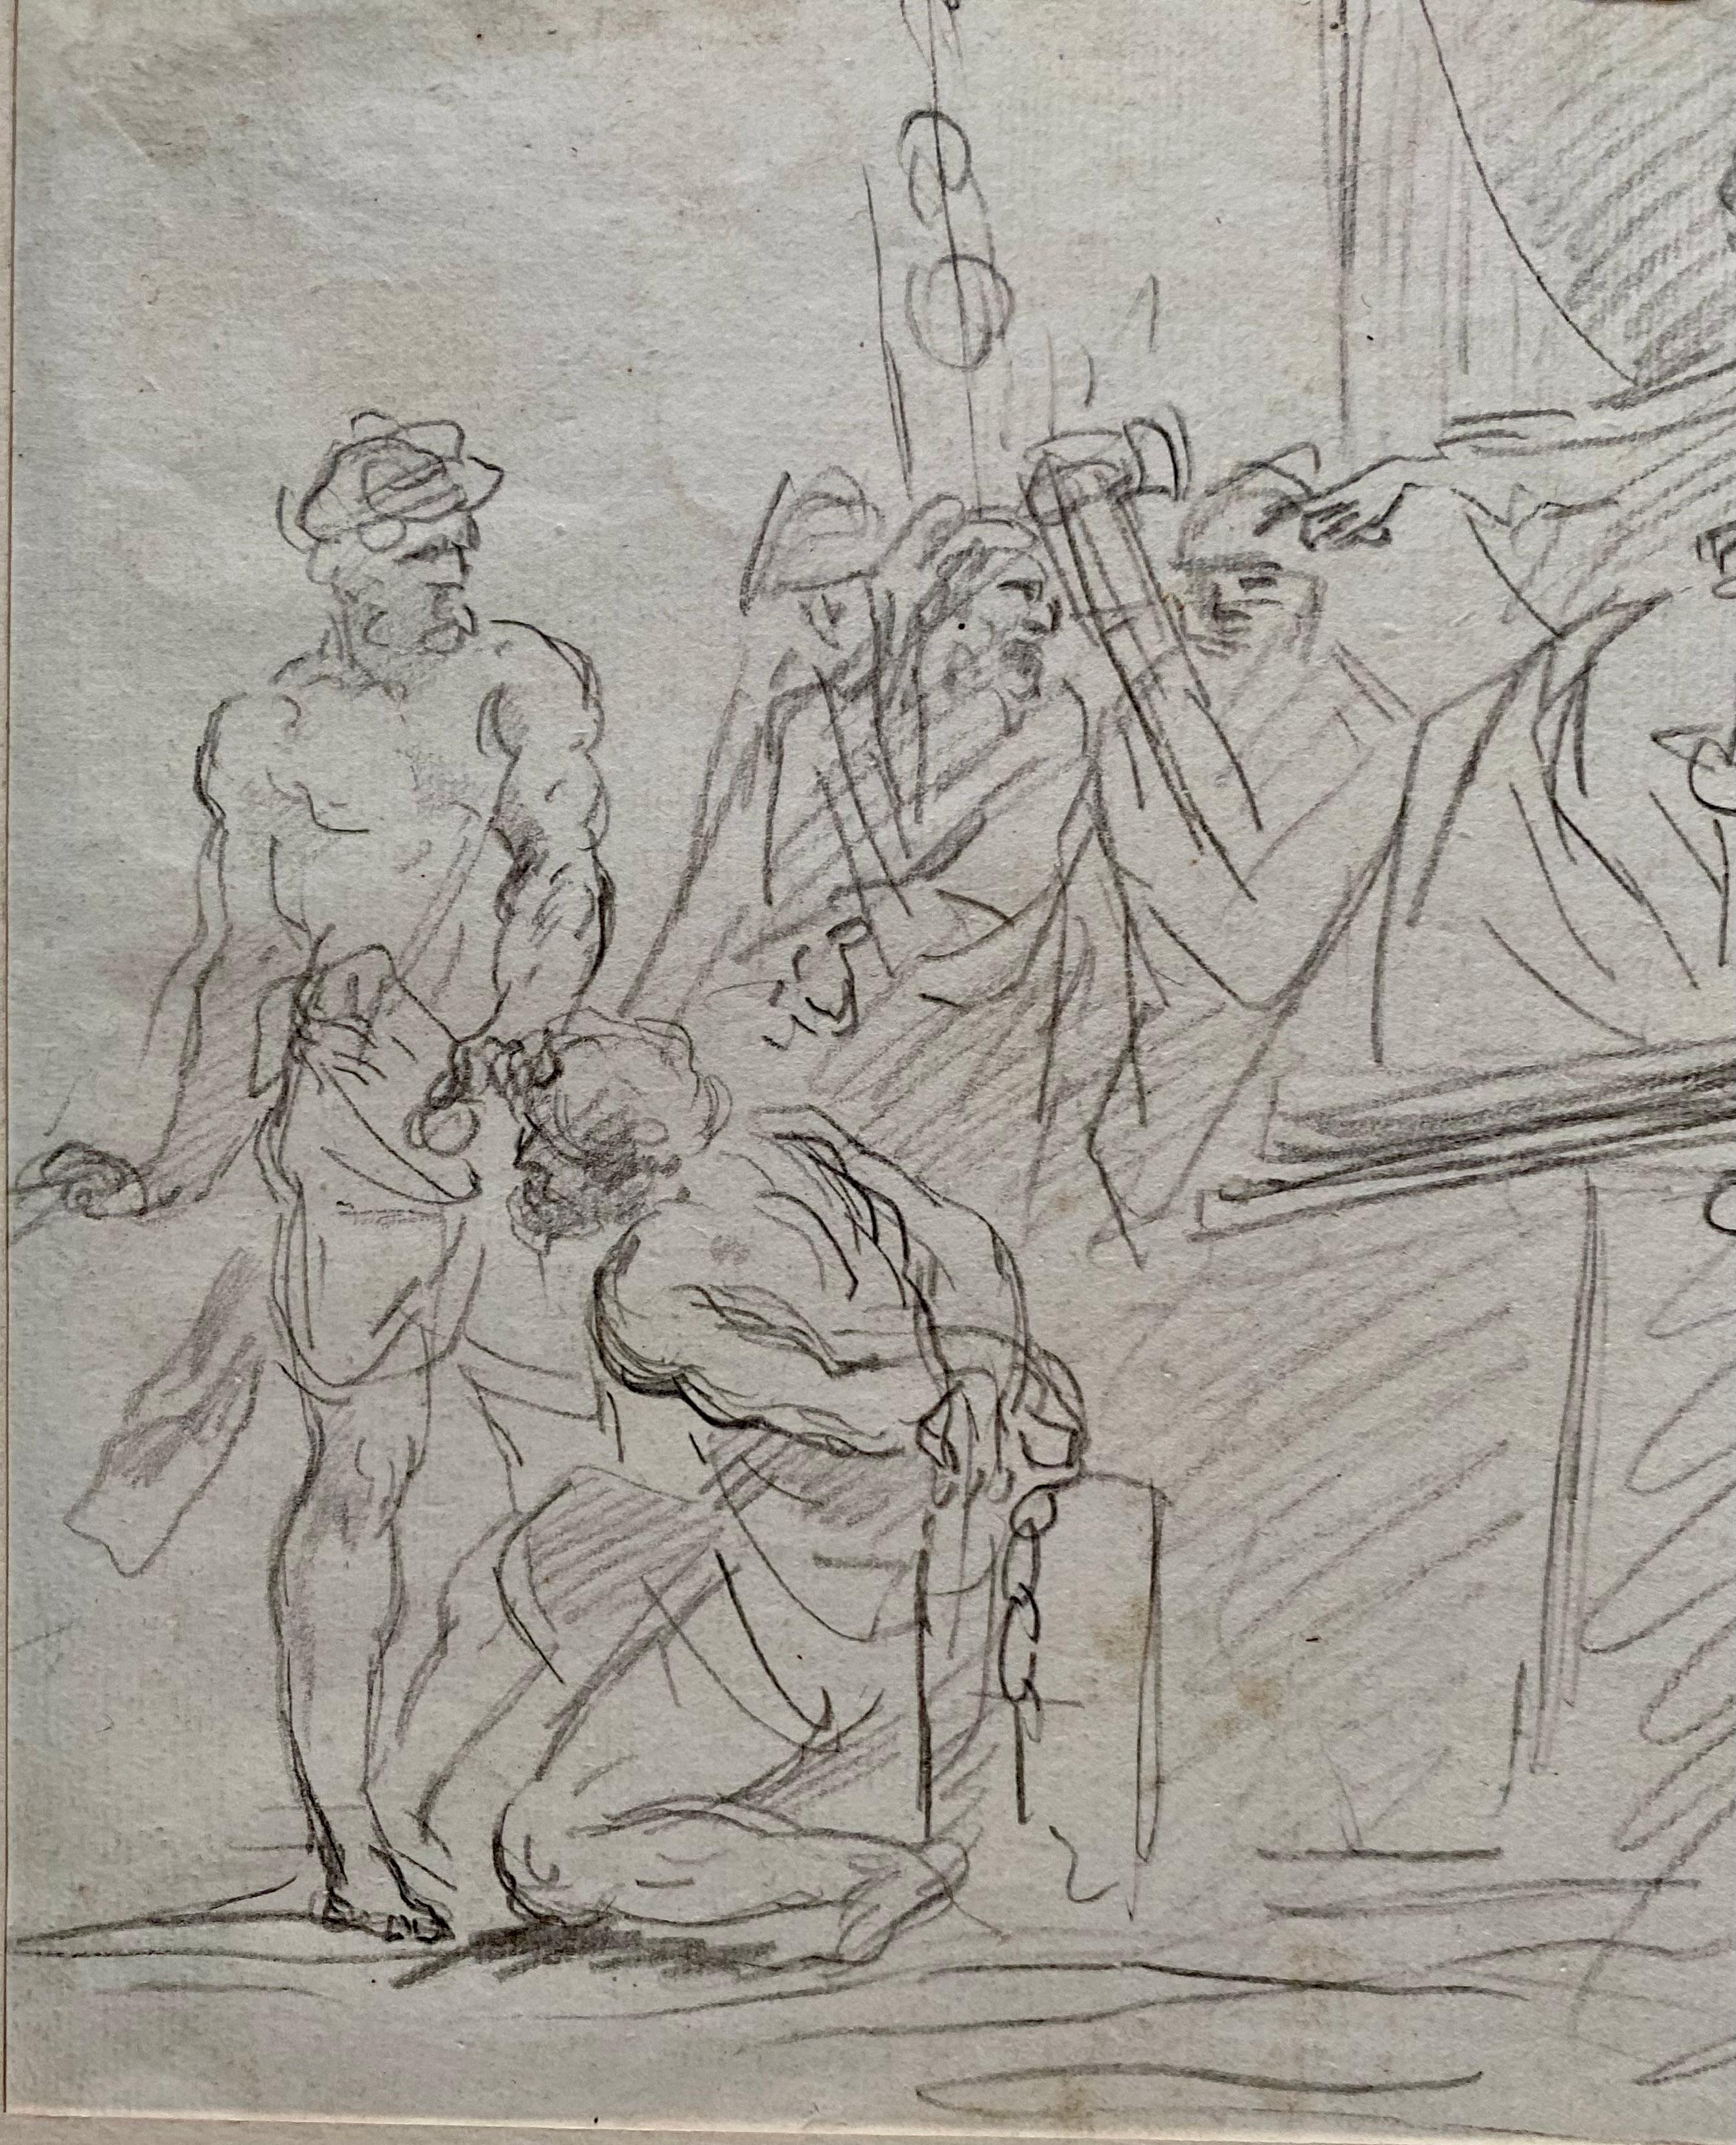 Italian School
Around 1700

Beheading scene in front of an enthroned king, probably a martyr scene

Black pencil
21.5 x 28 cm
29.5 x 39 cm
Provenance: Fryszman collection, sale on 01/20/1998
Good condition